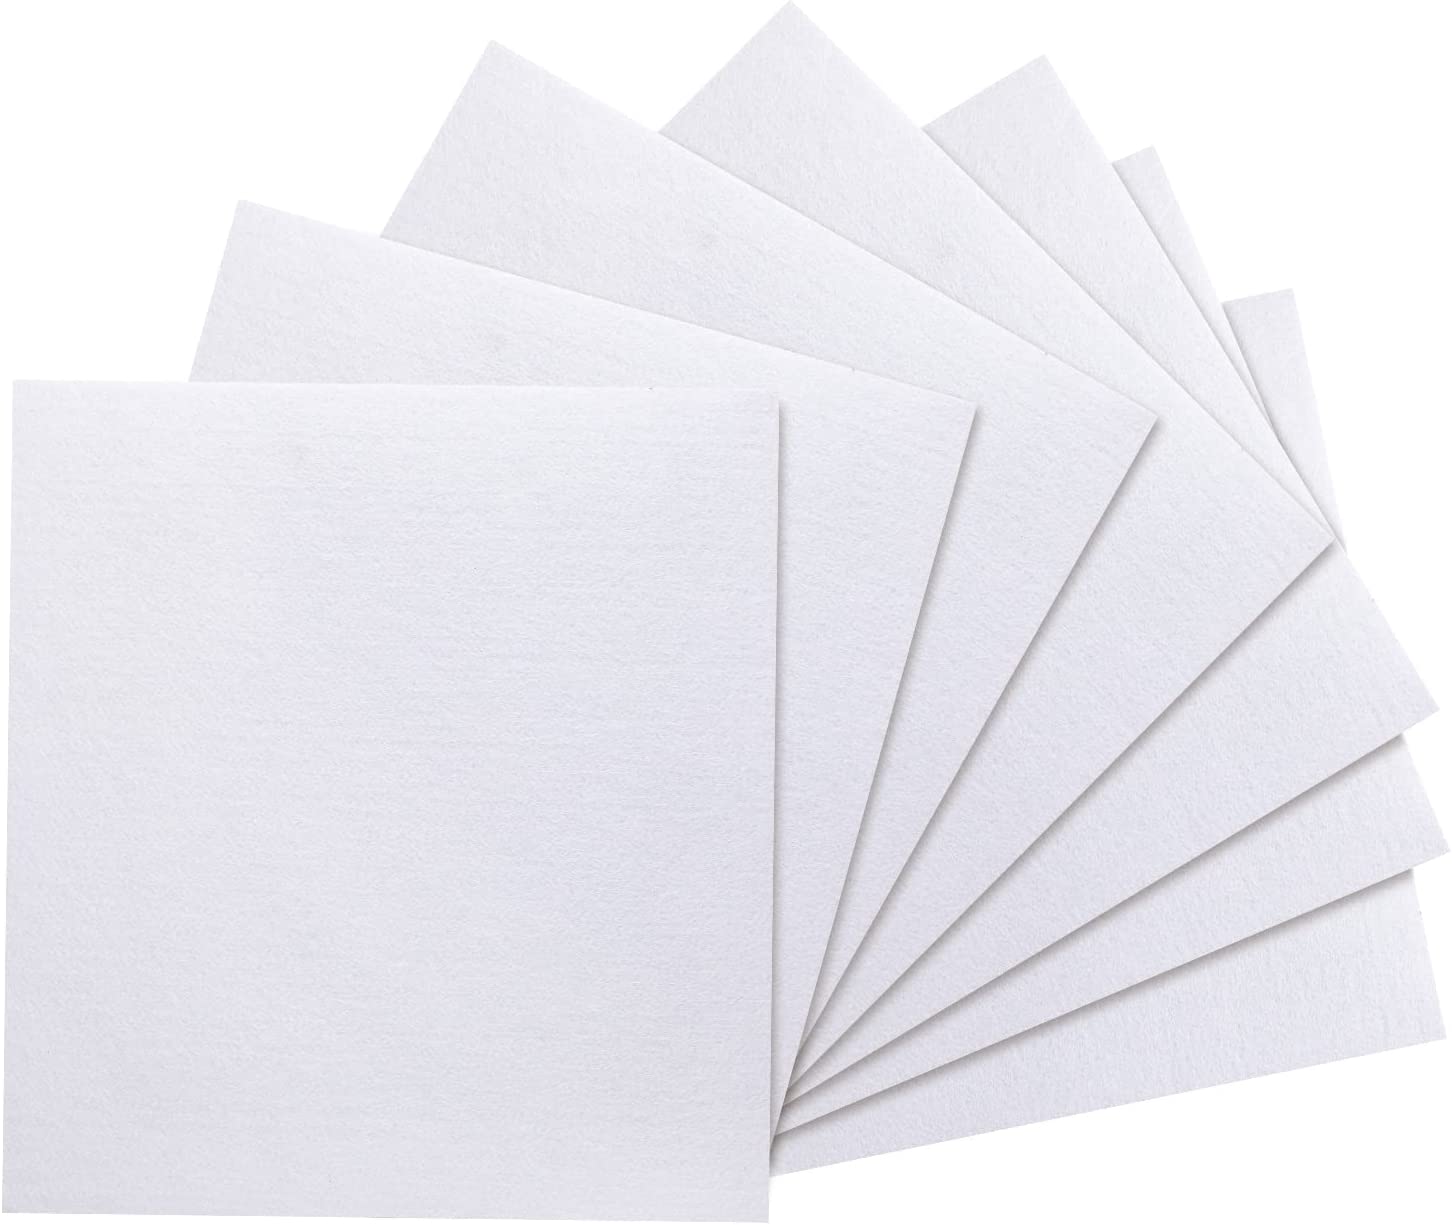 10 Pcs 12'' x 12'' White Felt Fabric Squares Sheets Nonwoven Fabric Squares  Soft for Cushion and Padding Patchwork Sewing DIY Craft - 3mm Thick